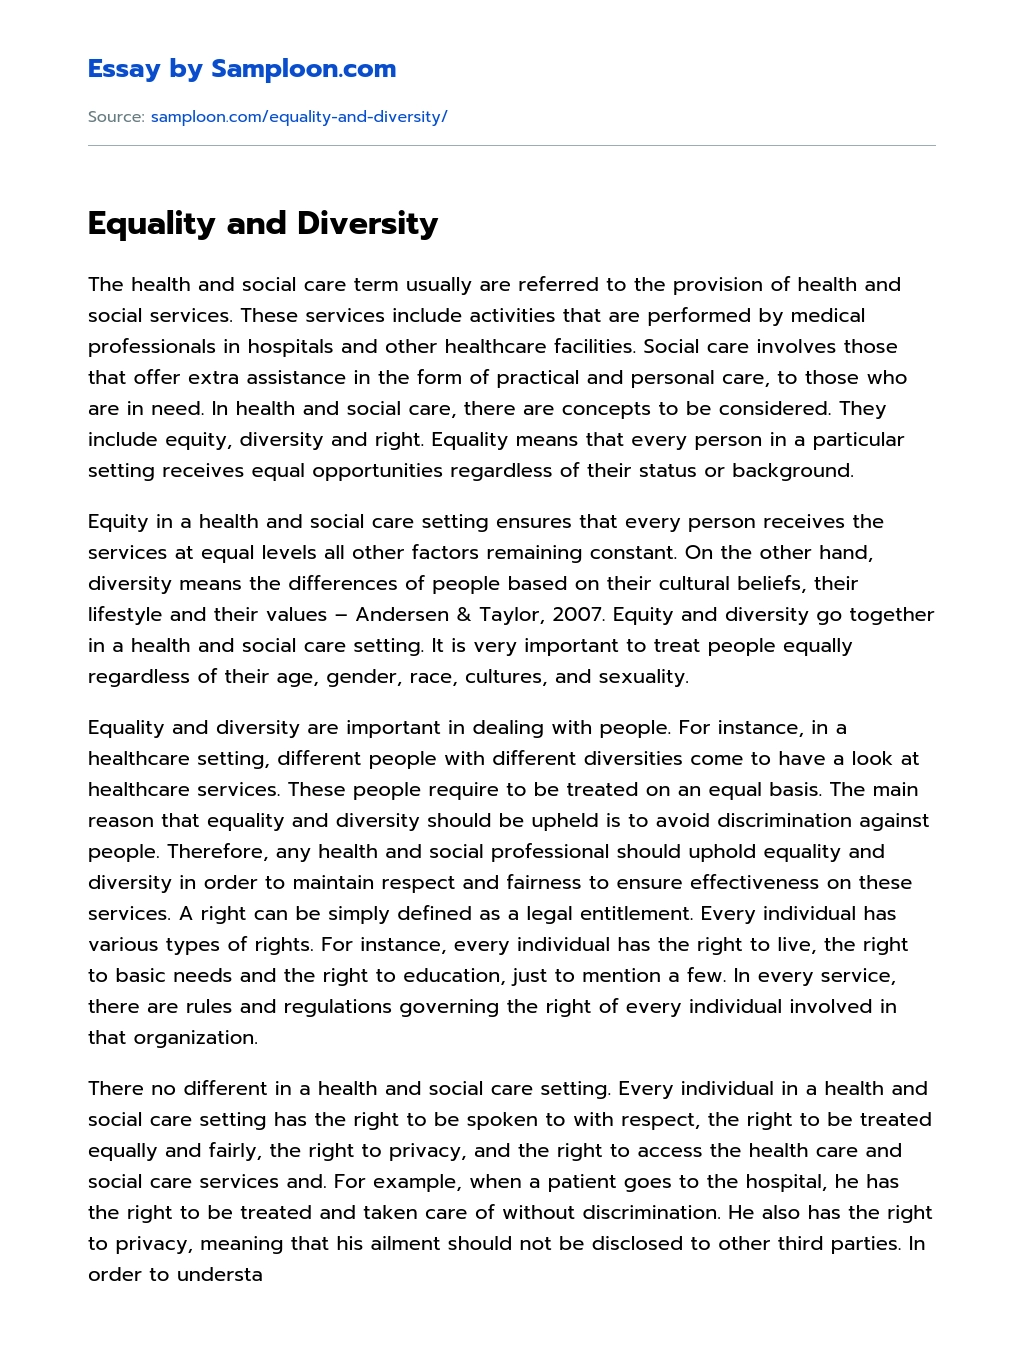 Equality and Diversity essay